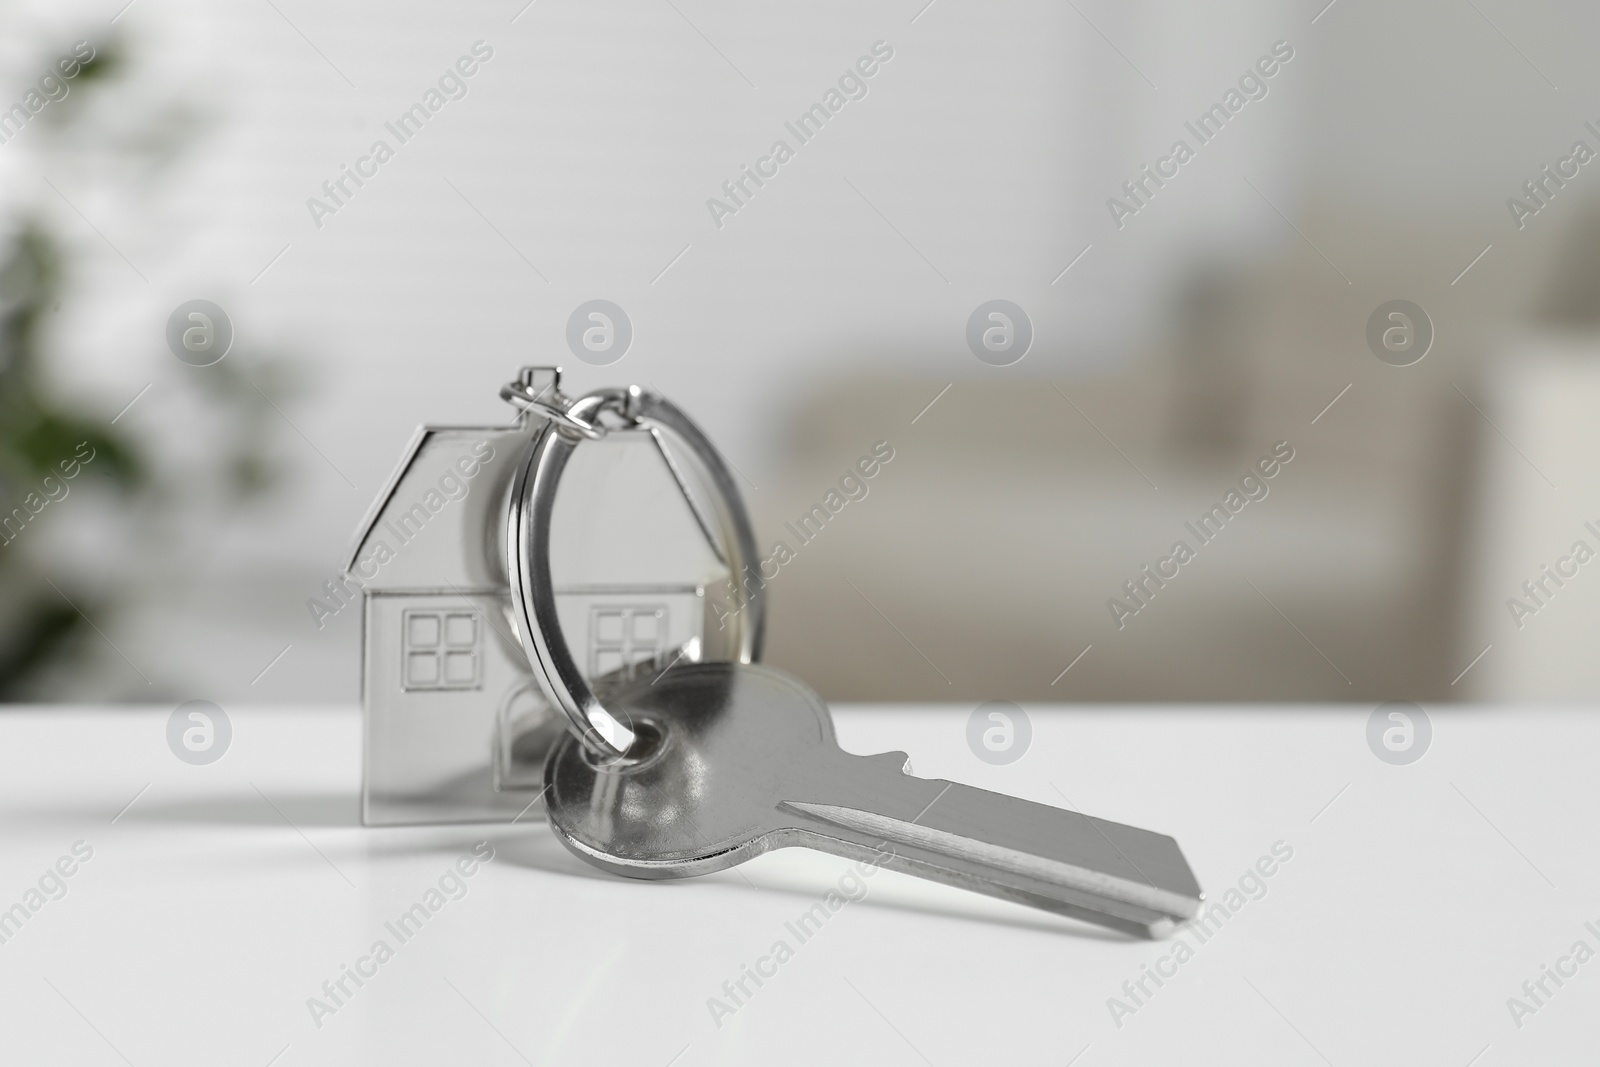 Photo of Key with keychain in shape of house on white table against blurred background, closeup. Space for text